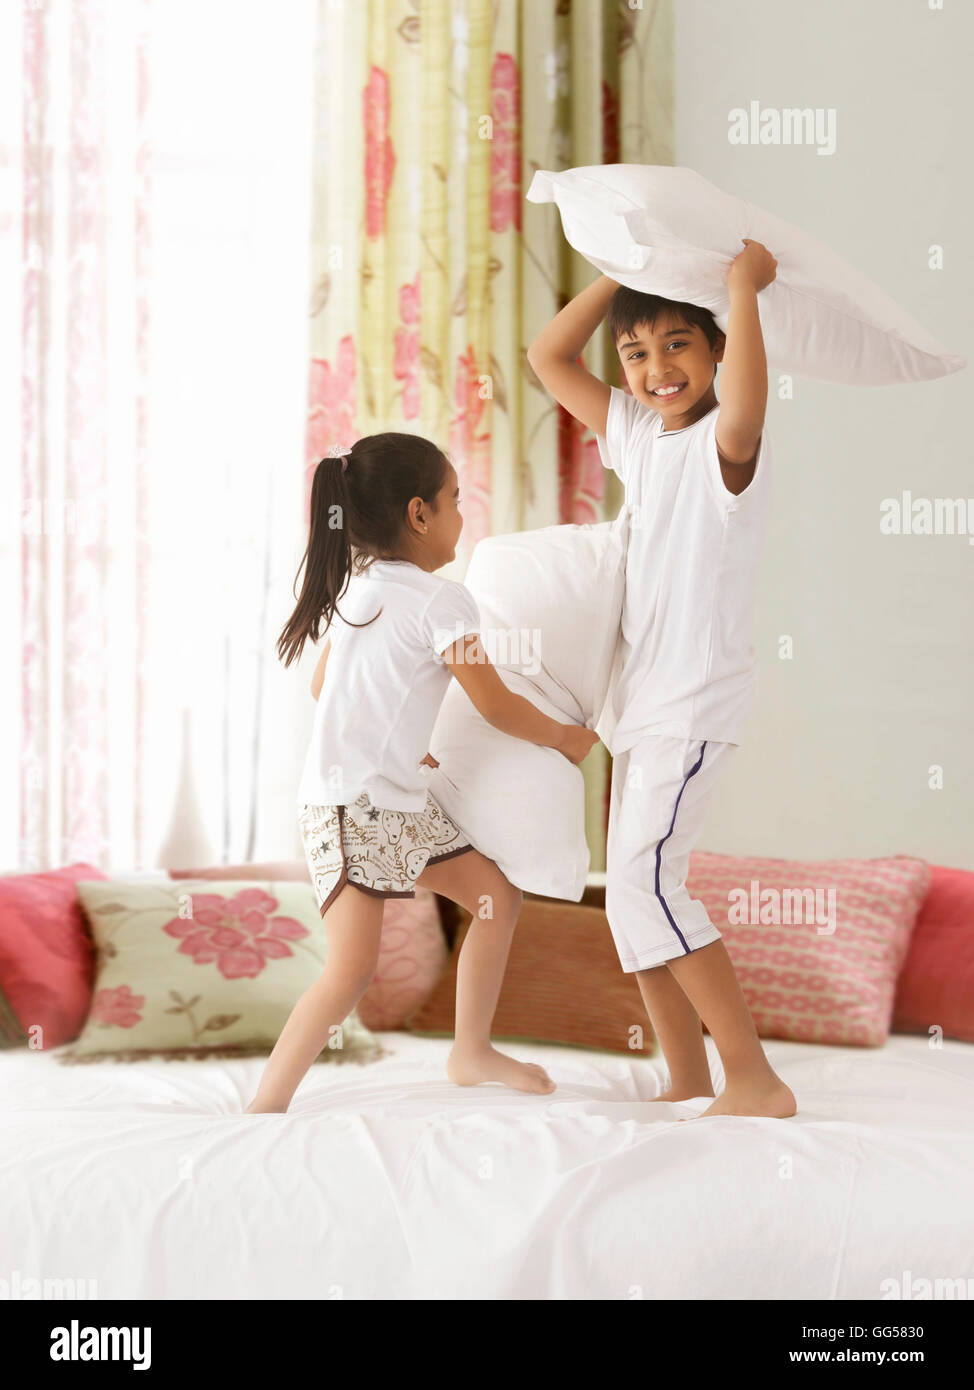 Playful siblings having pillow fight on bed Stock Photo - Alamy